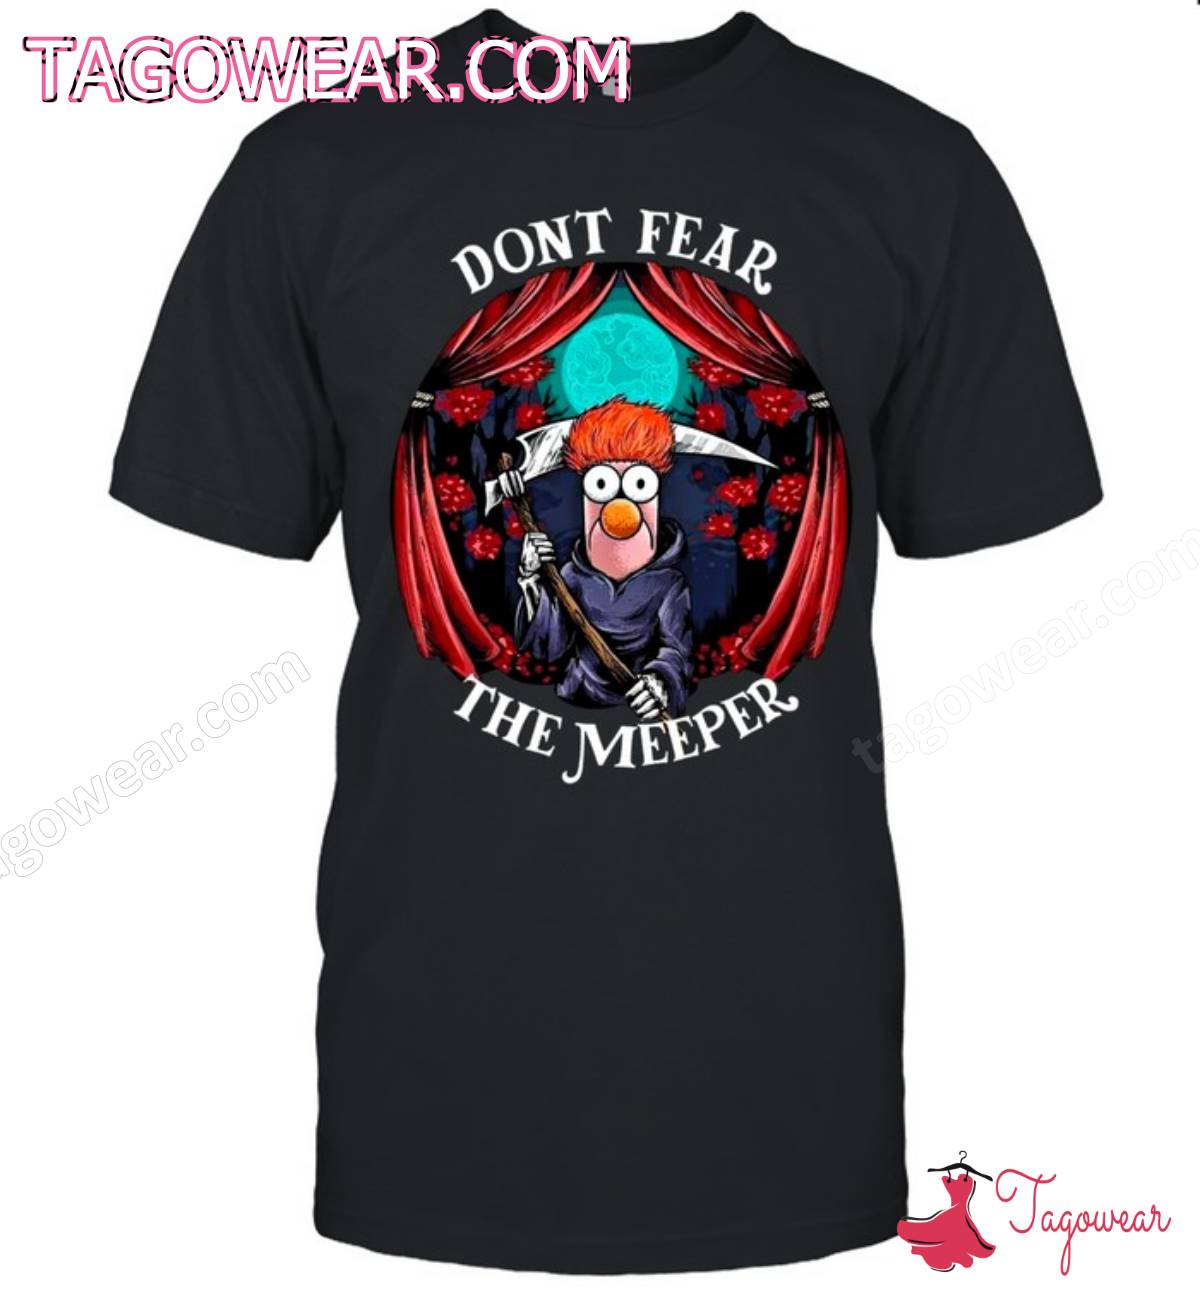 Don't Fear The Meeper Shirt